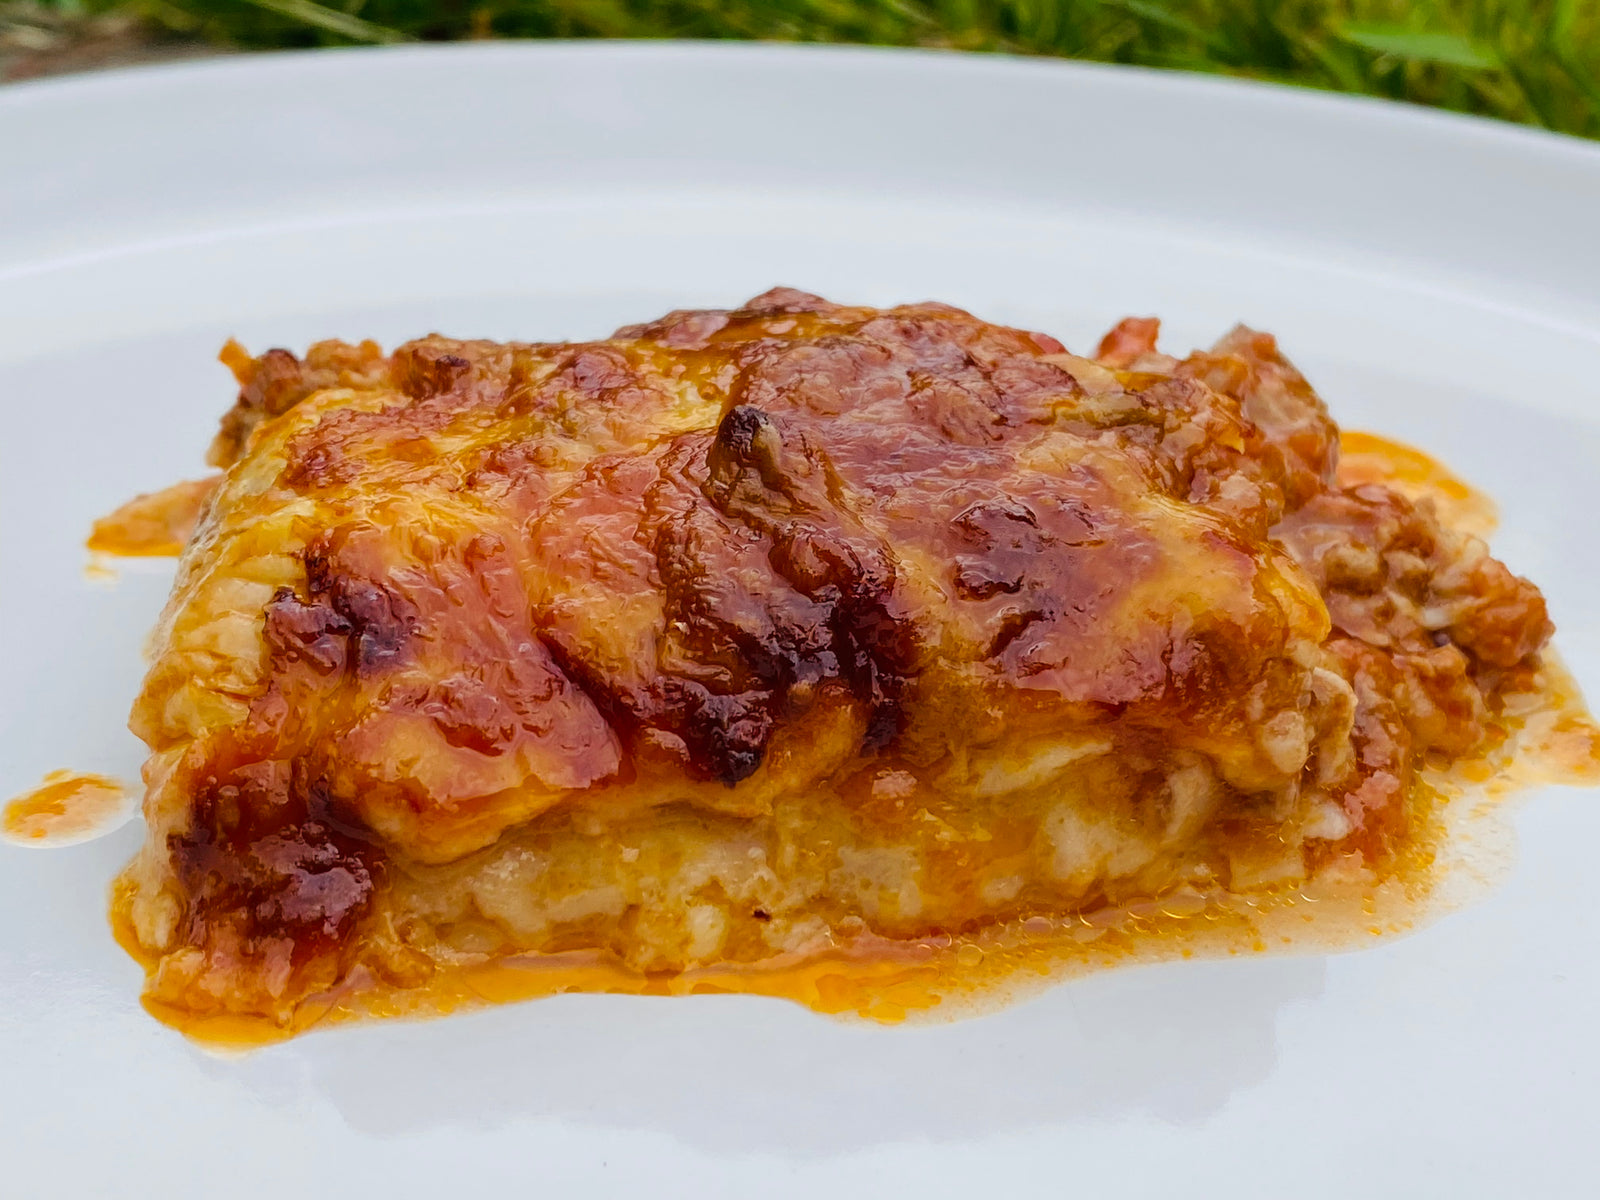 How to bake a keto lasagne?